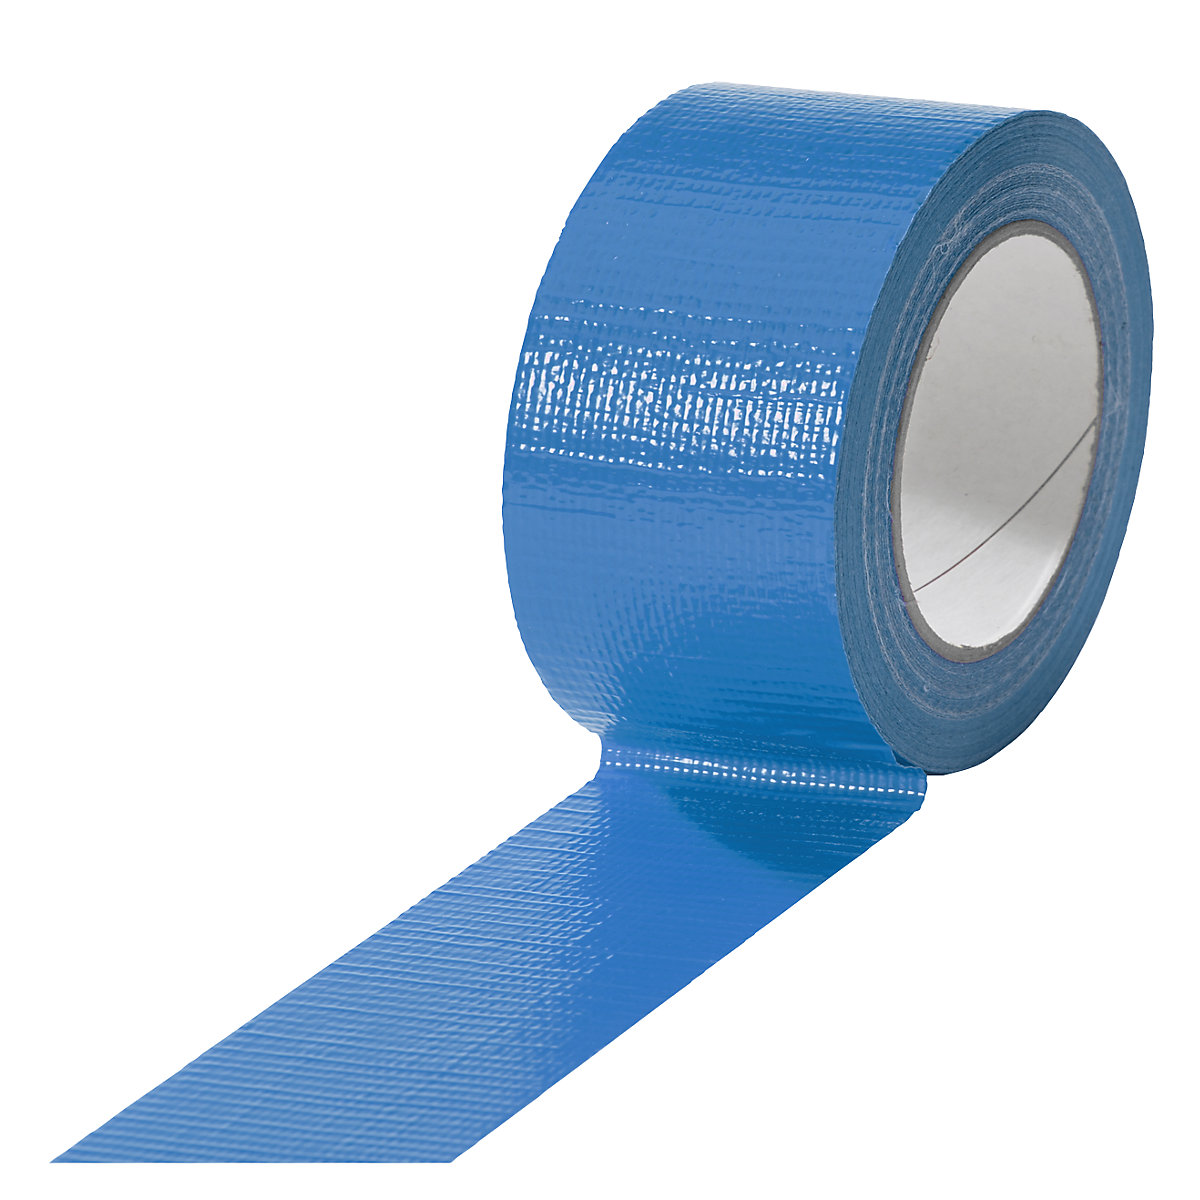 Fabric tape, in different colours, pack of 18 rolls, blue, tape width 50 mm-20